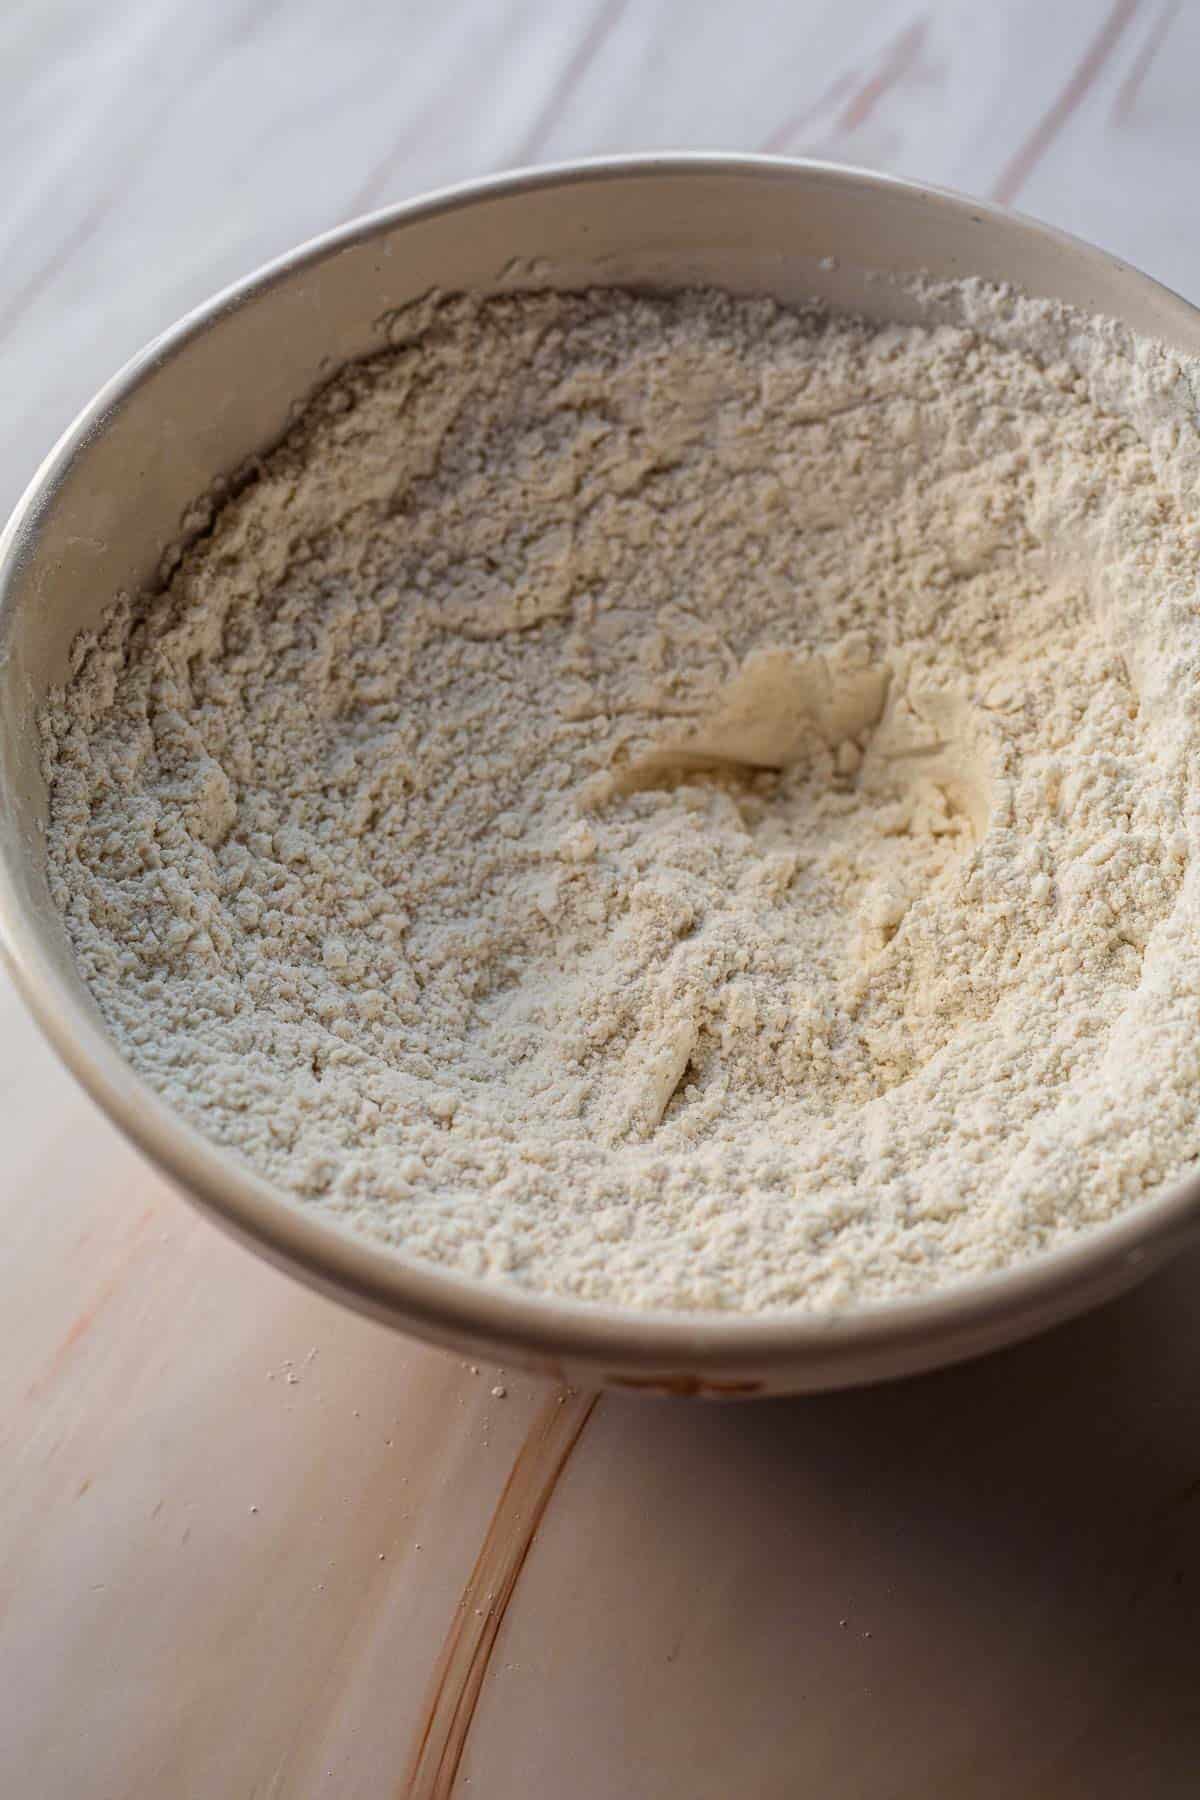 A close-up image of a bowl filled with gluten-free flour, placed on a light wooden surface. The texture of the flour is finely ground and loosely settled.